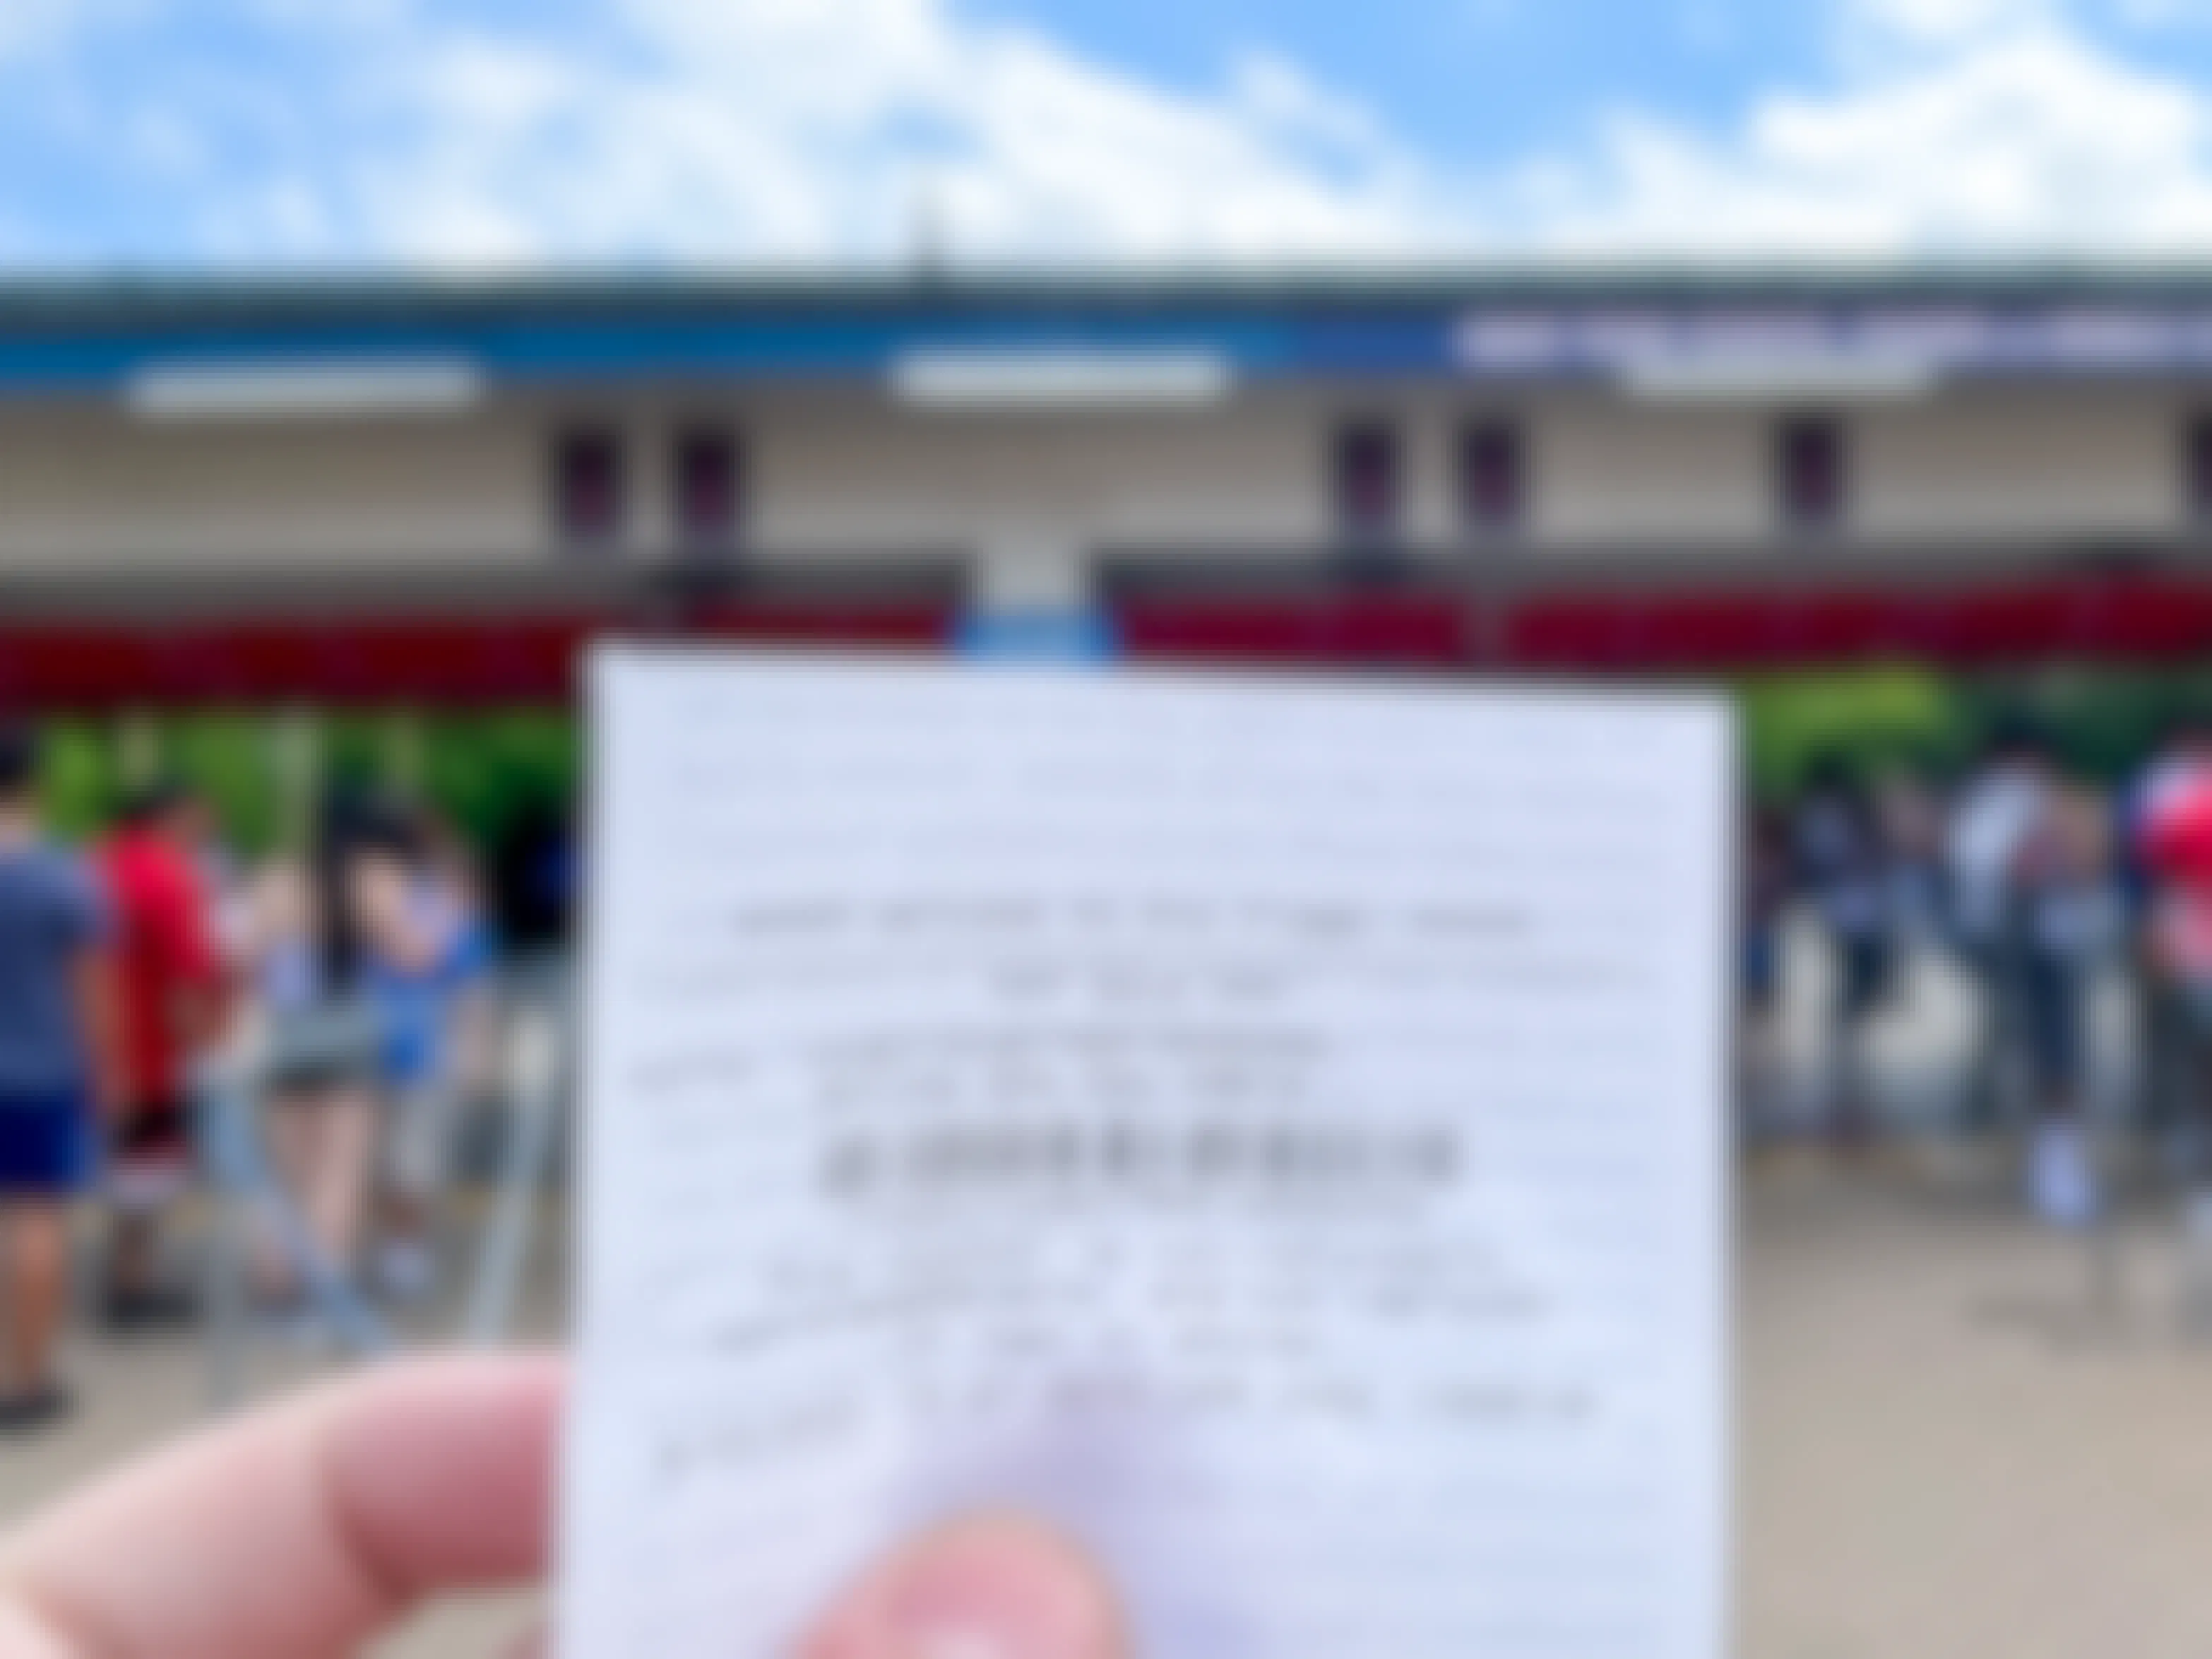 A Six Flags ticket held in front of the amusement park entrance